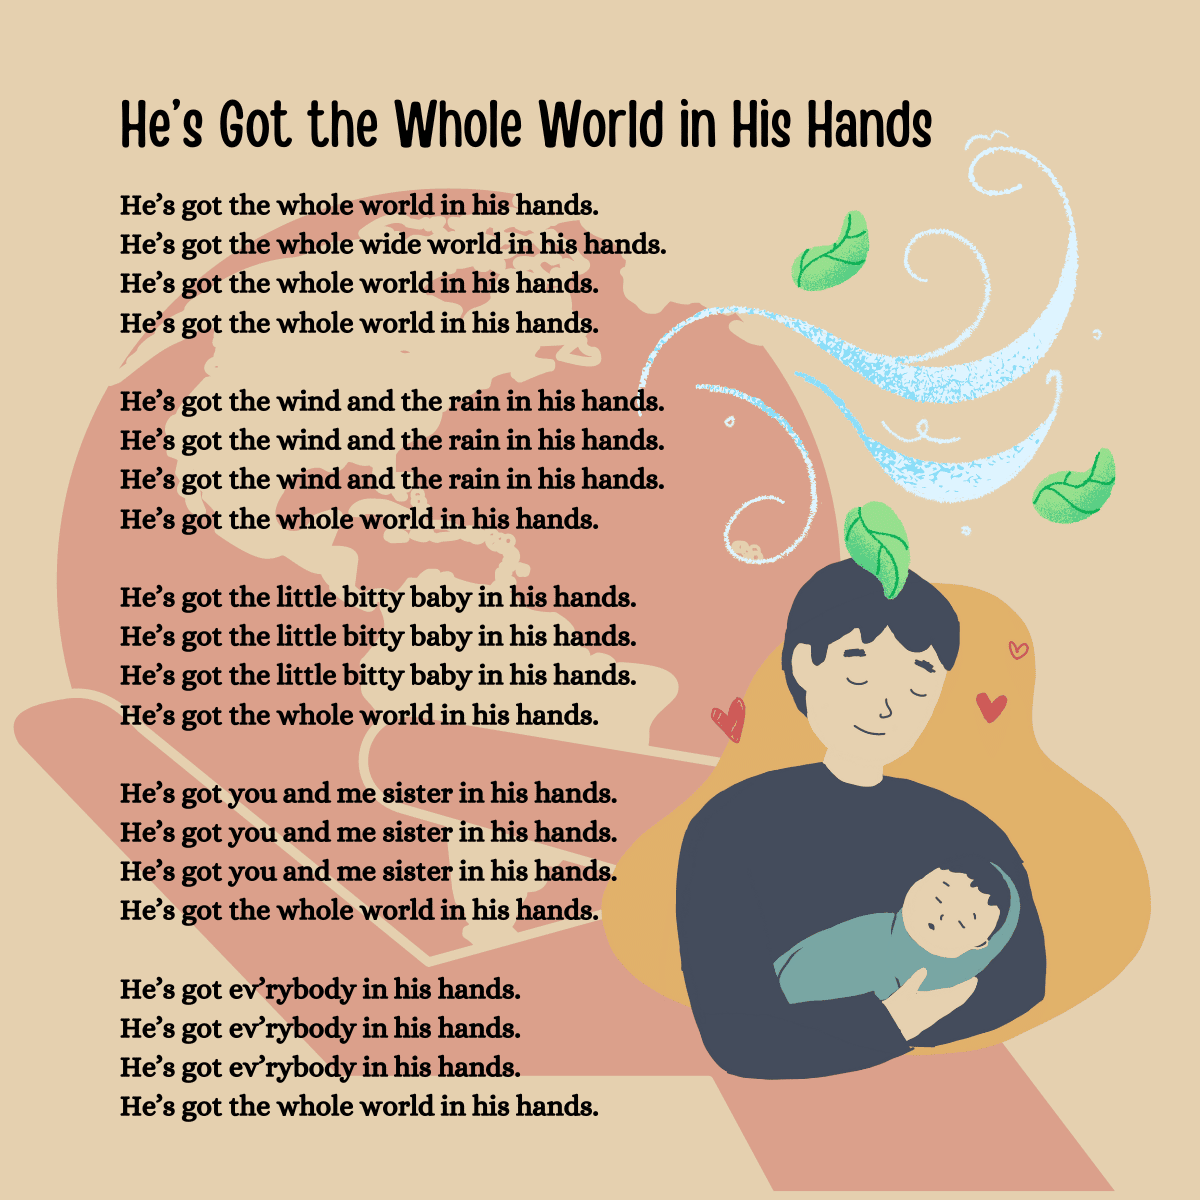 He’s Got the Whole World in His Hands lyrics